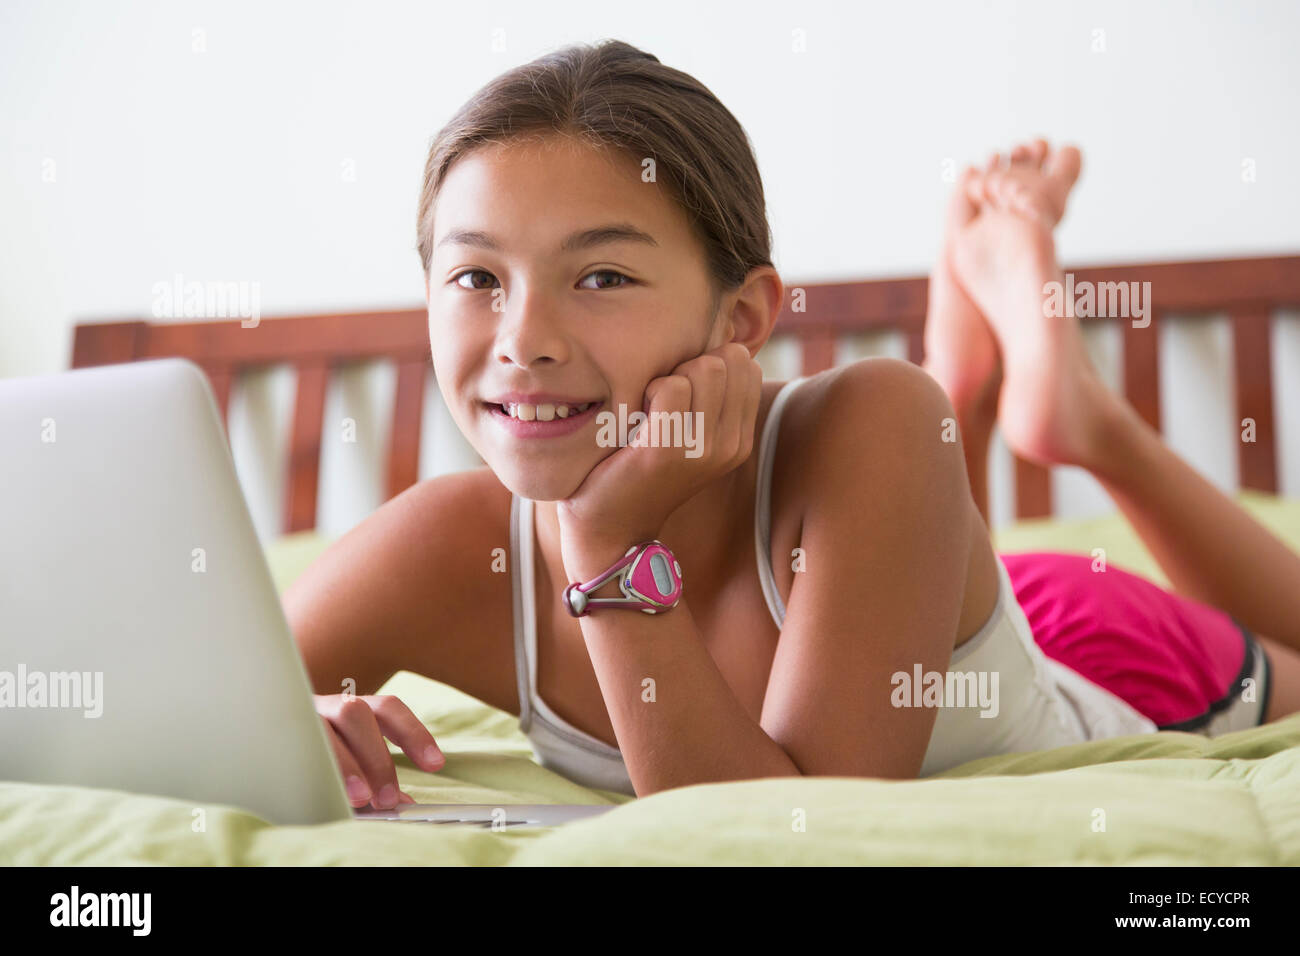 Mixed Race girl using laptop on bed Banque D'Images